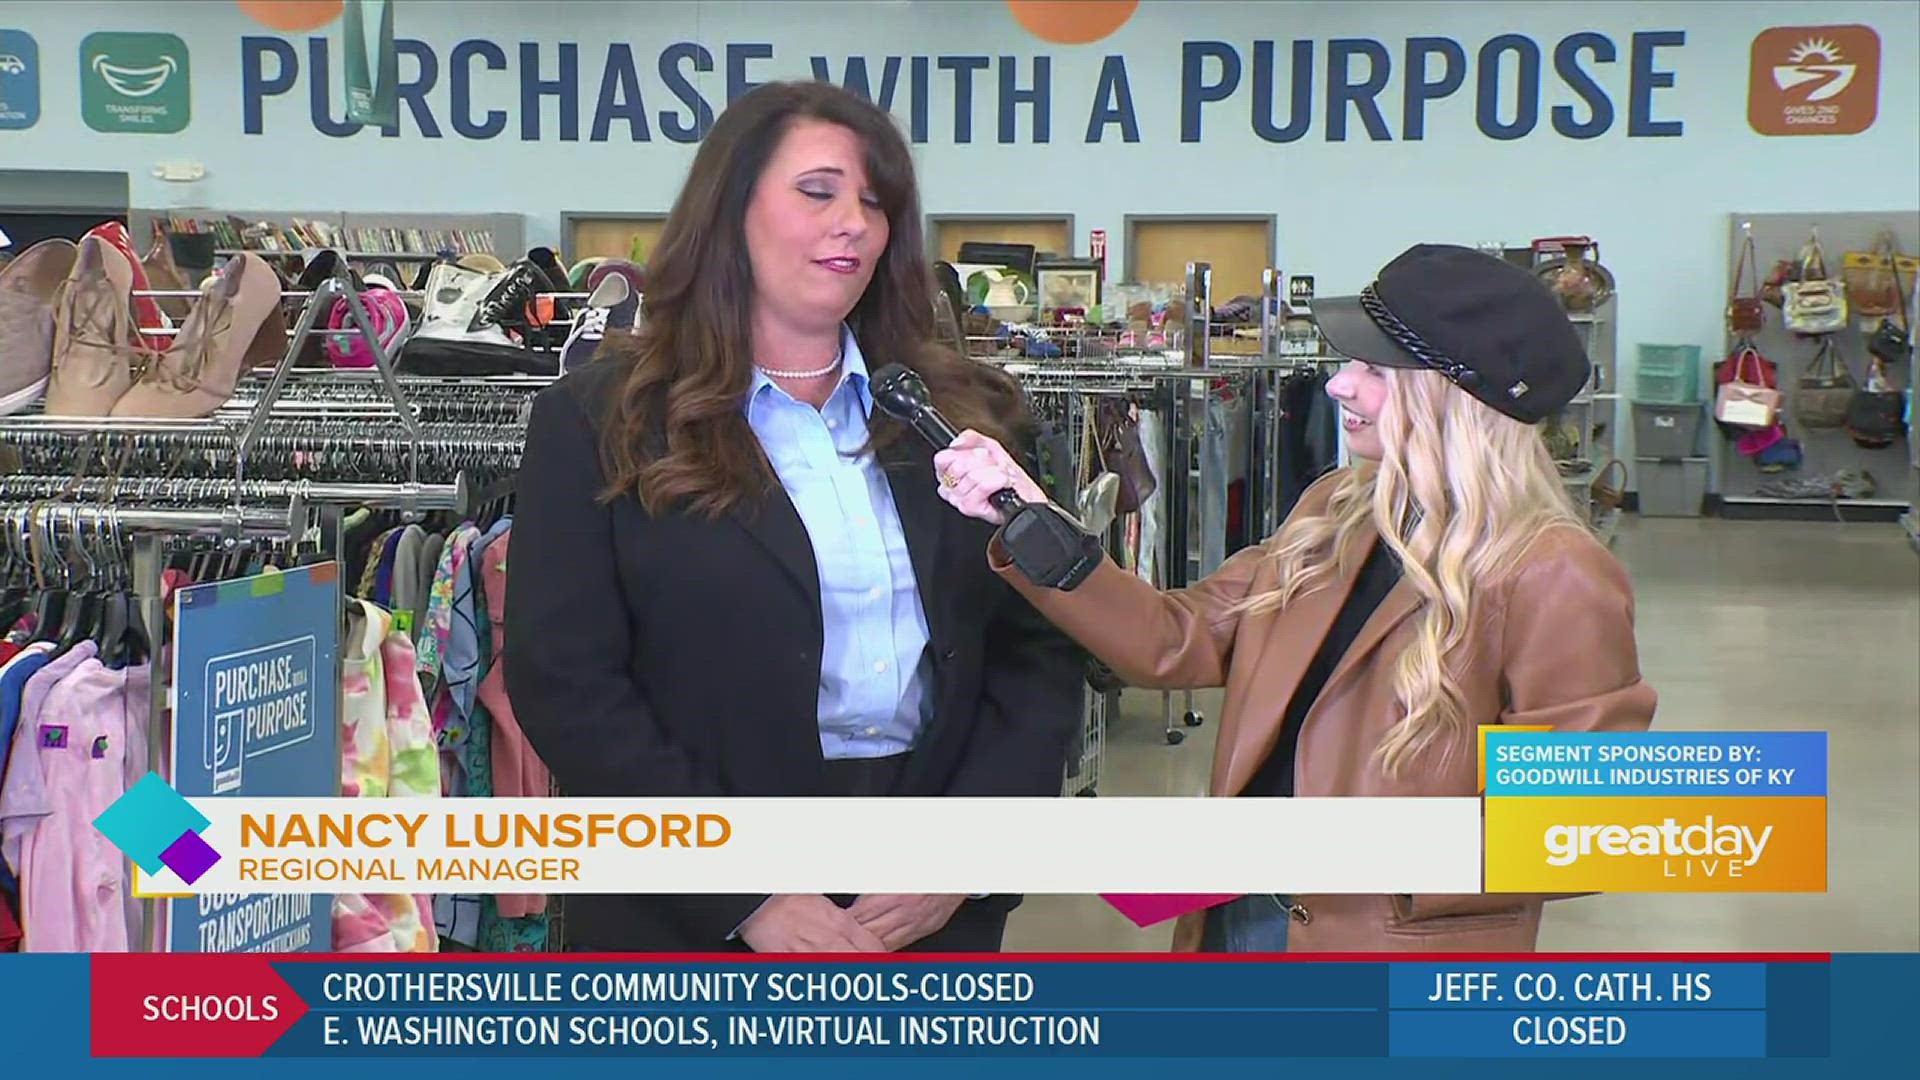 Goodwill Industries of Kentucky on Great Day Live!